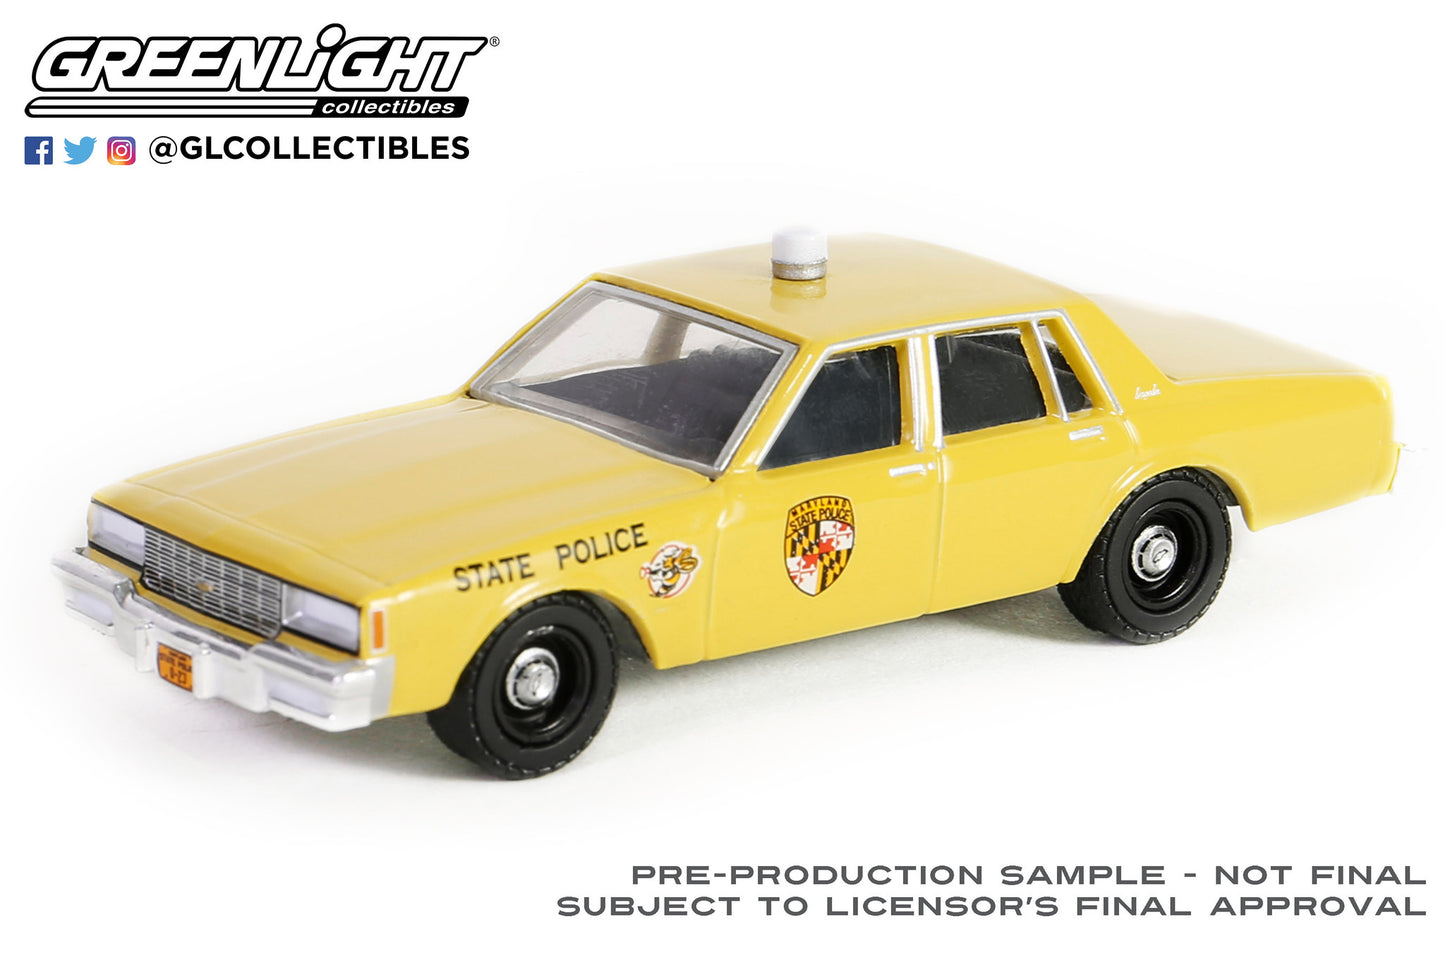 GreenLight 1:64 Hot Pursuit Series 45 - 1983 Chevrolet Impala - Maryland State 43030-A